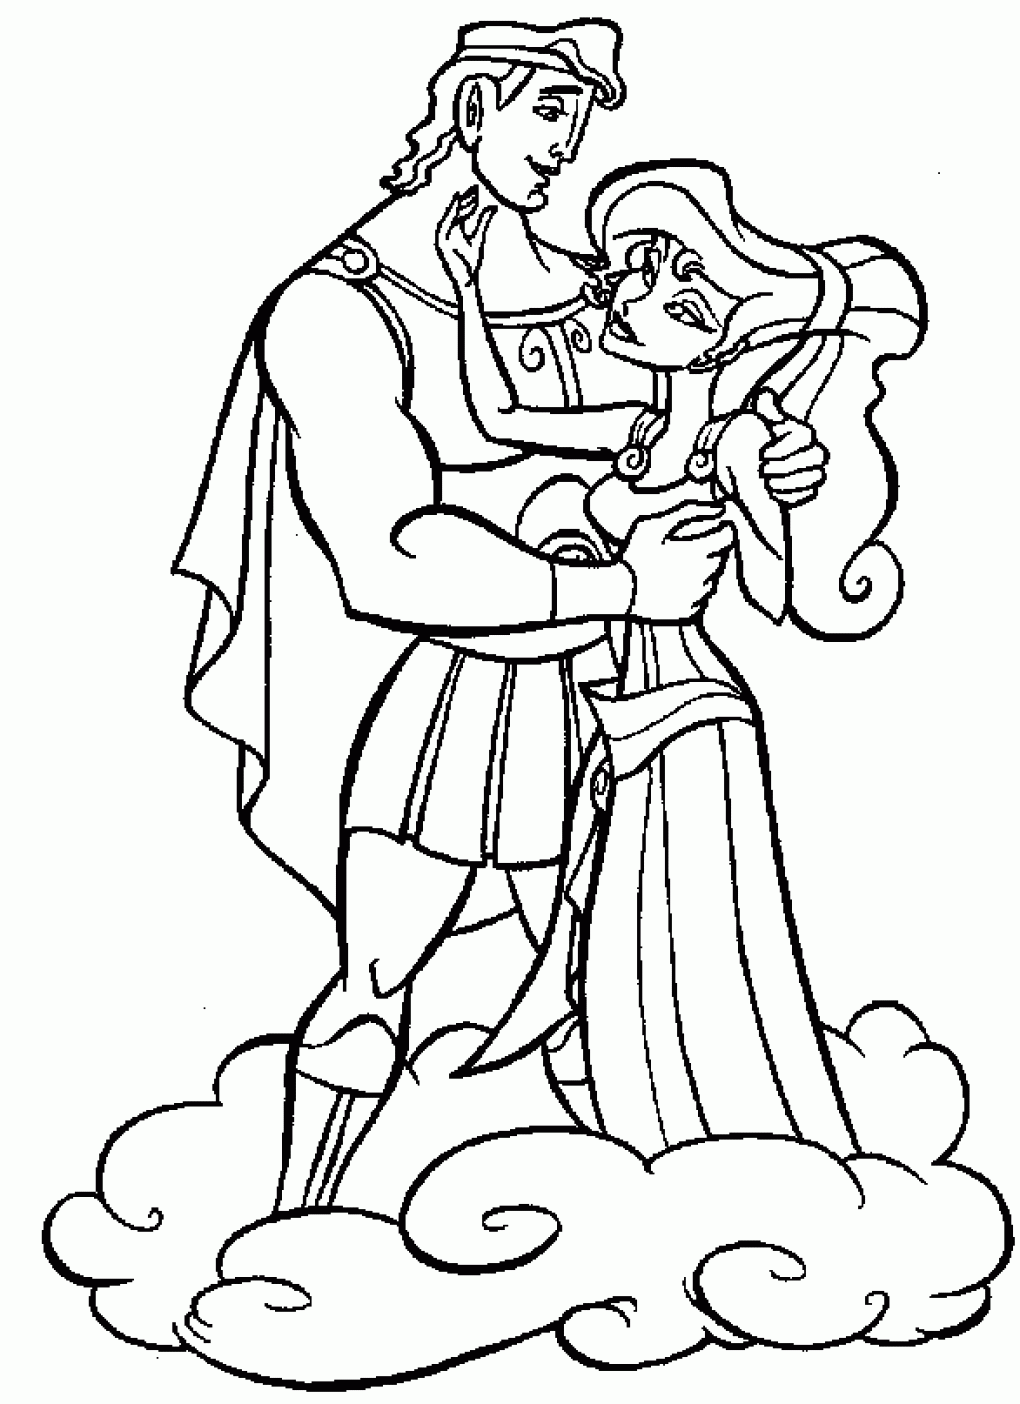 Free Printable Hercules Coloring Pages For Kids HD Wallpapers Download Free Images Wallpaper [wallpaper896.blogspot.com]